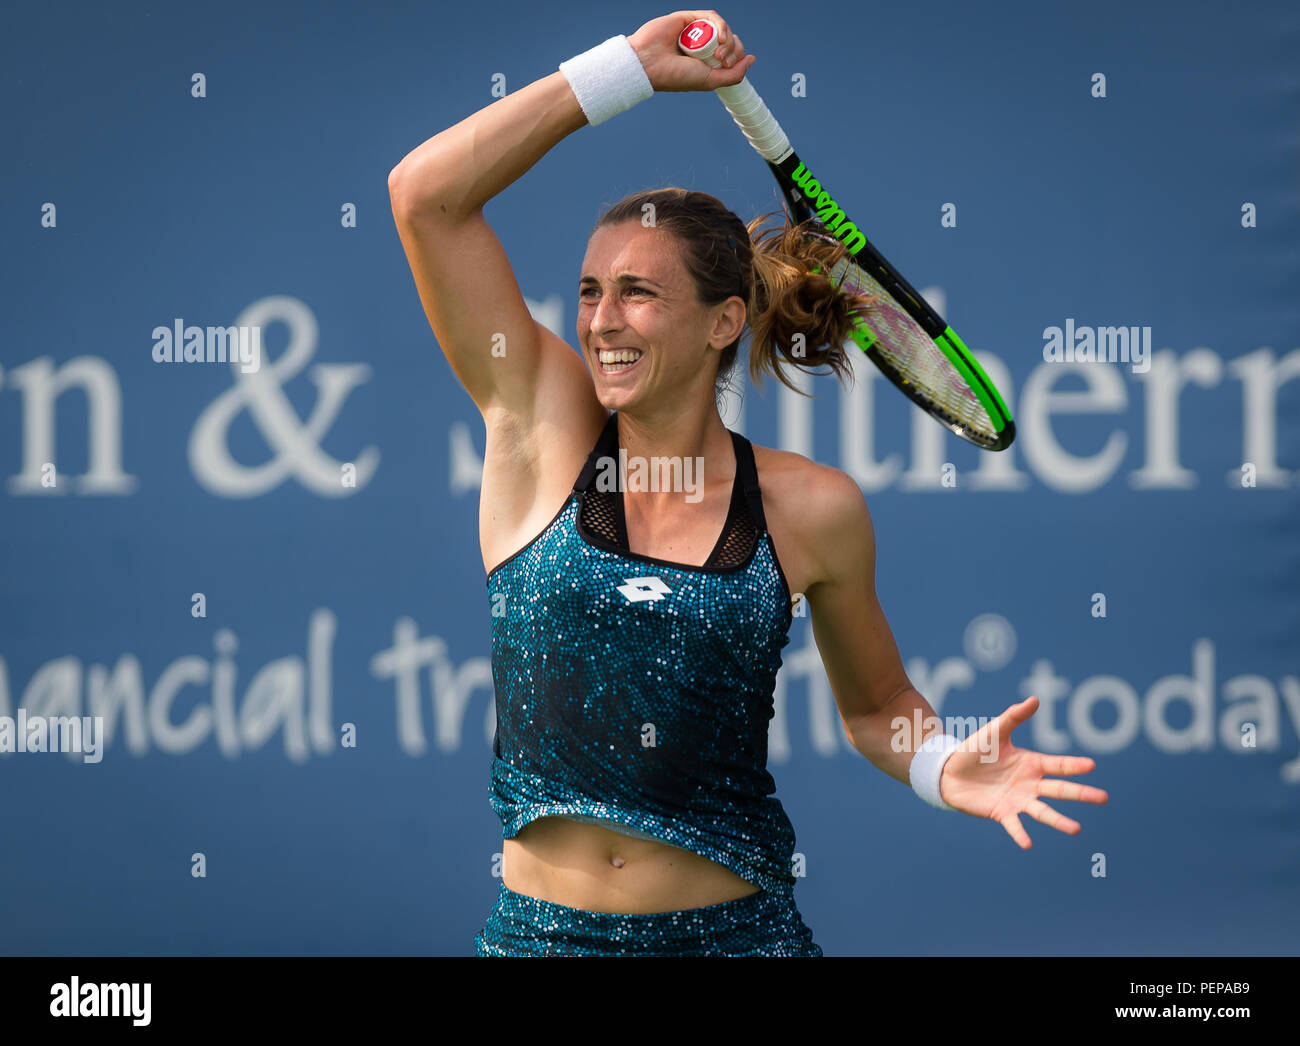 Cincinnati, Ohio, USA. August 16, 2018 - Petra Martic of Croatia in action  during her third-round match at the 2018 Western & Southern Open WTA  Premier 5 tennis tournament. Cincinnati, Ohio, USA.